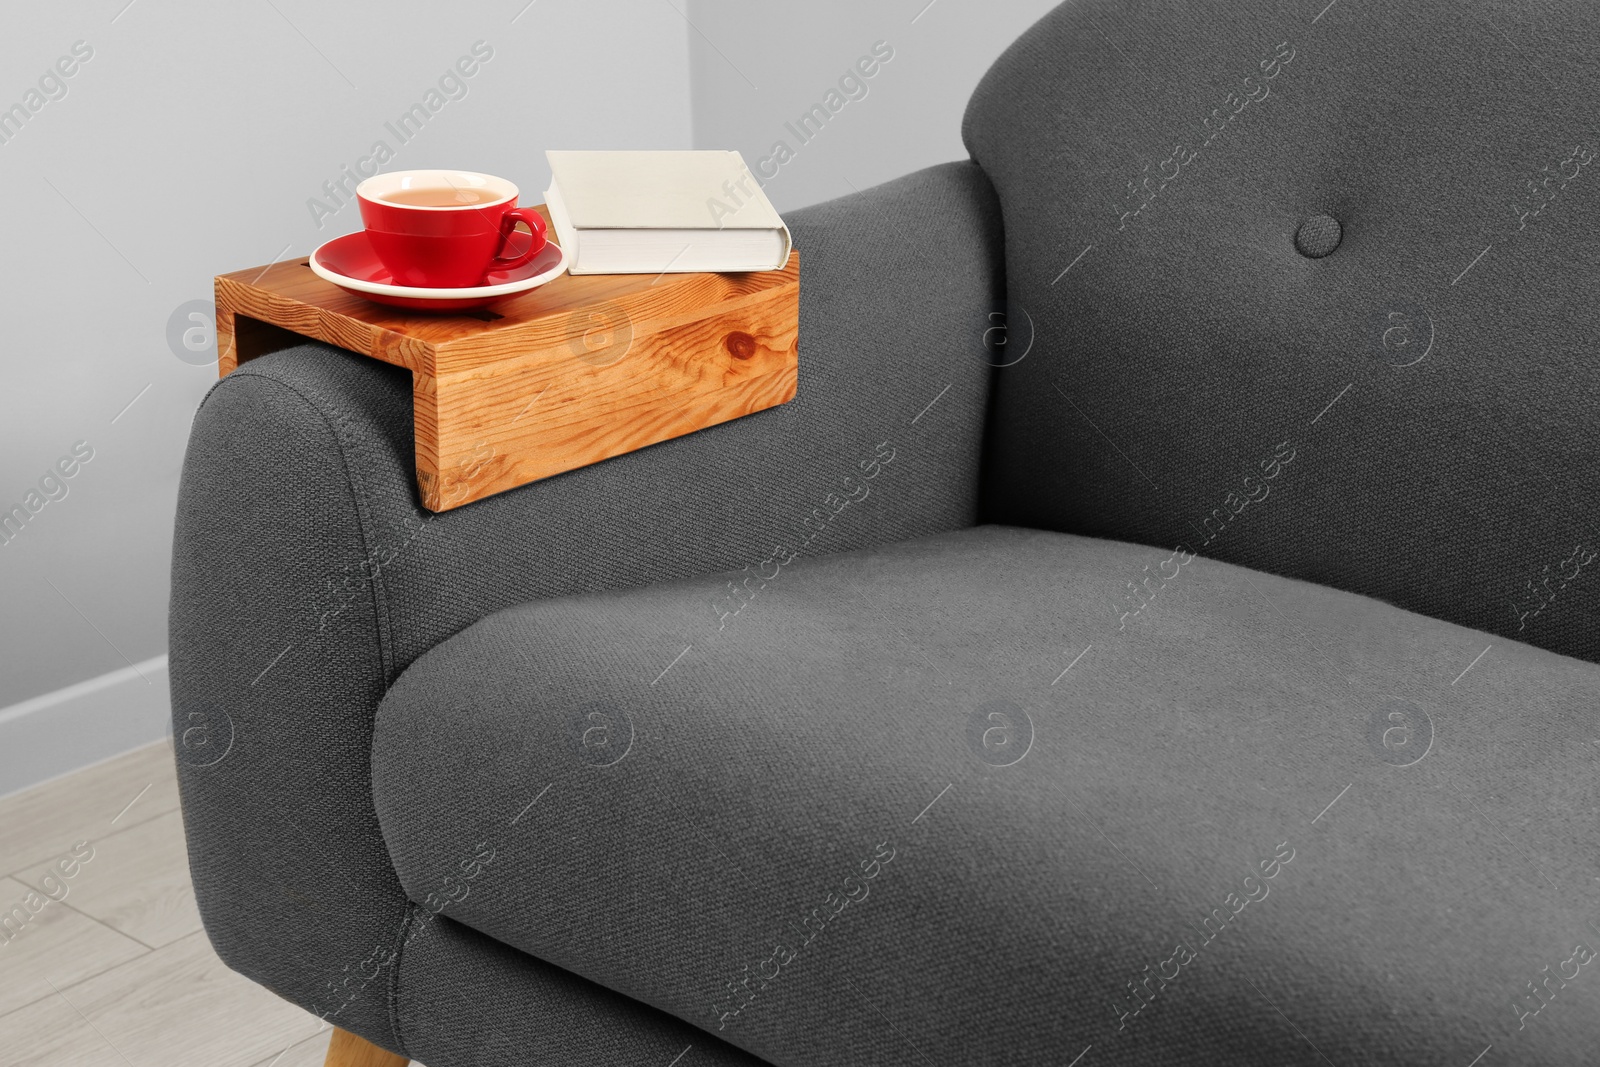 Photo of Cup of tea and book on sofa with wooden armrest table in room. Interior element